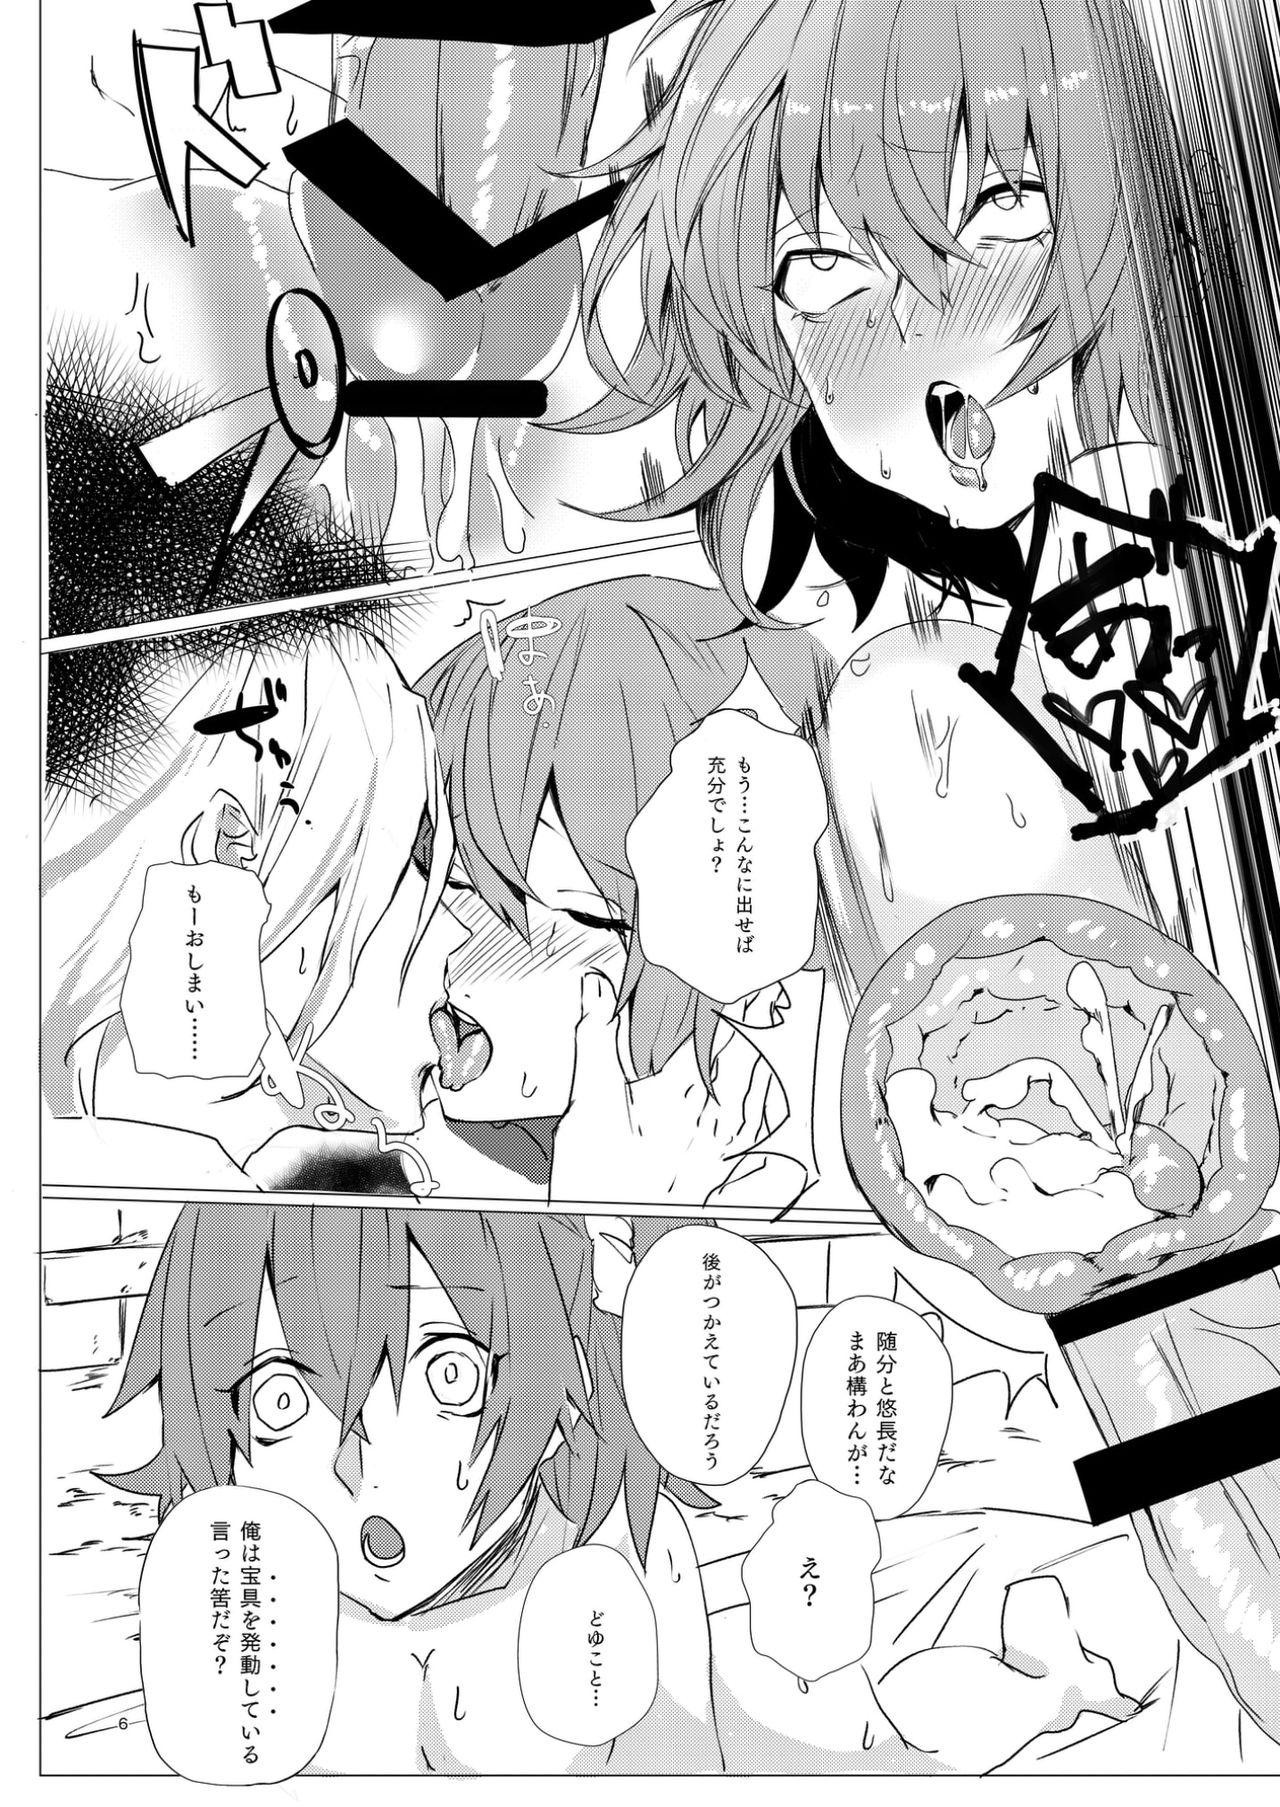 Cock Suckers ]one hundred monte cristo - Fate grand order Gay Pawnshop - Page 7